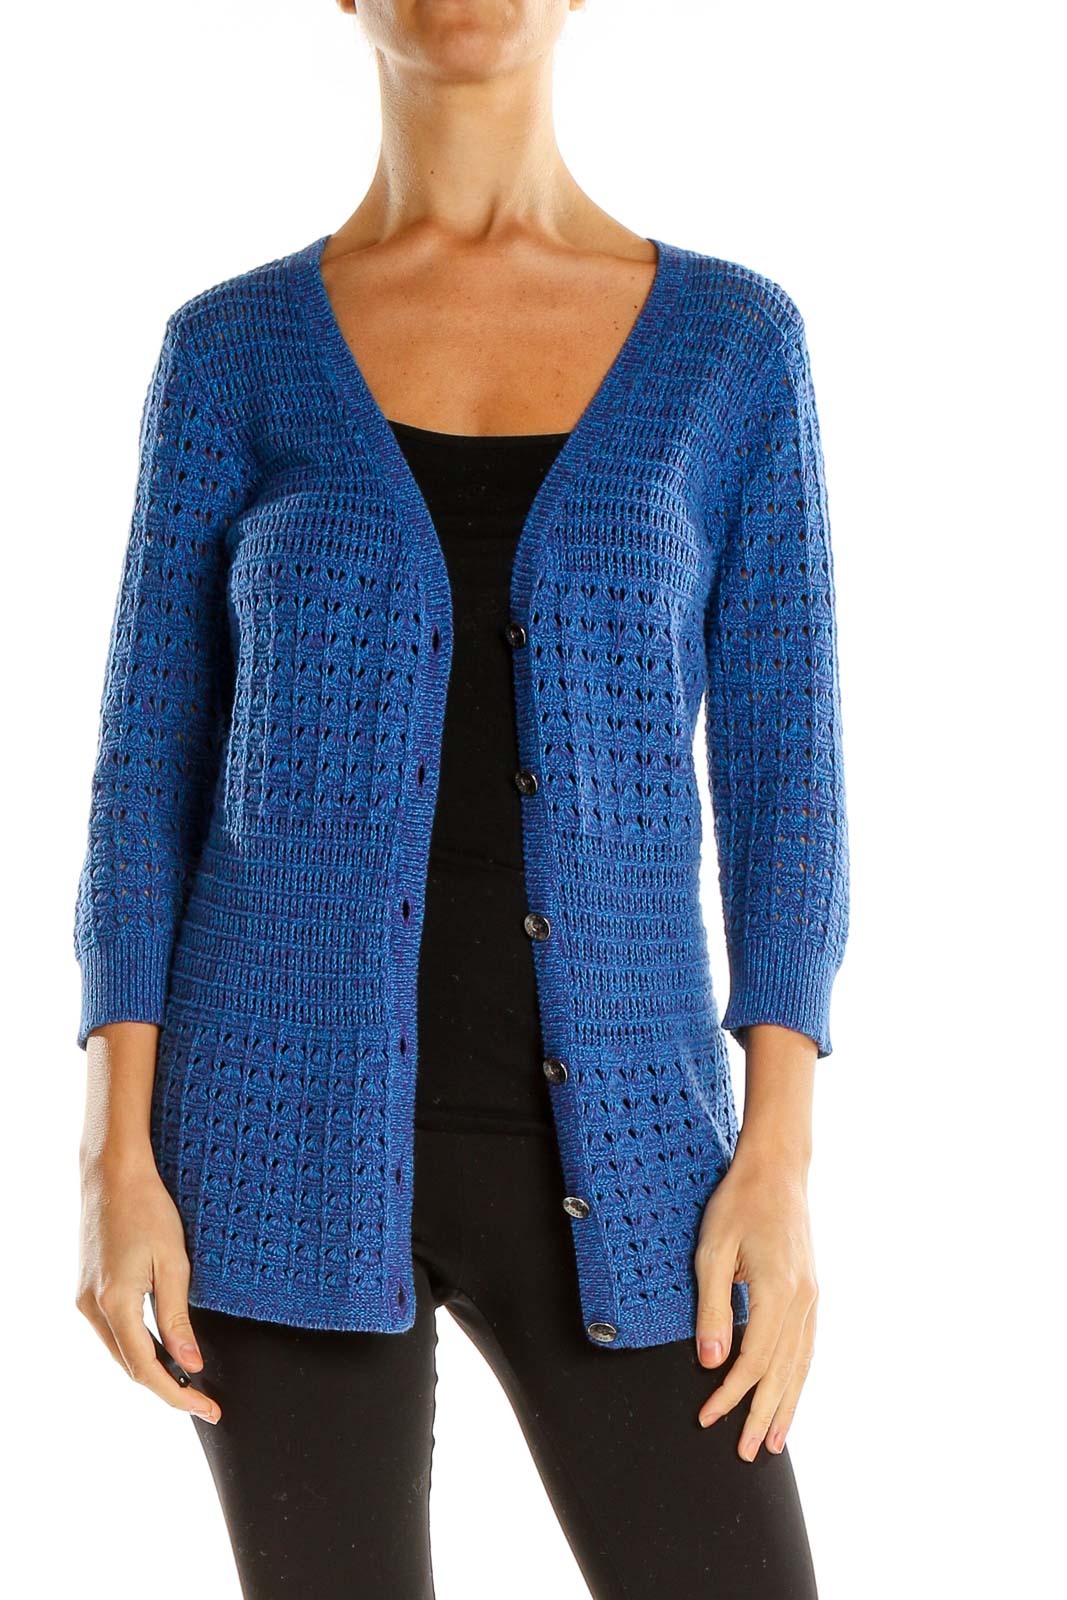 Blue Woven Cardigan Front